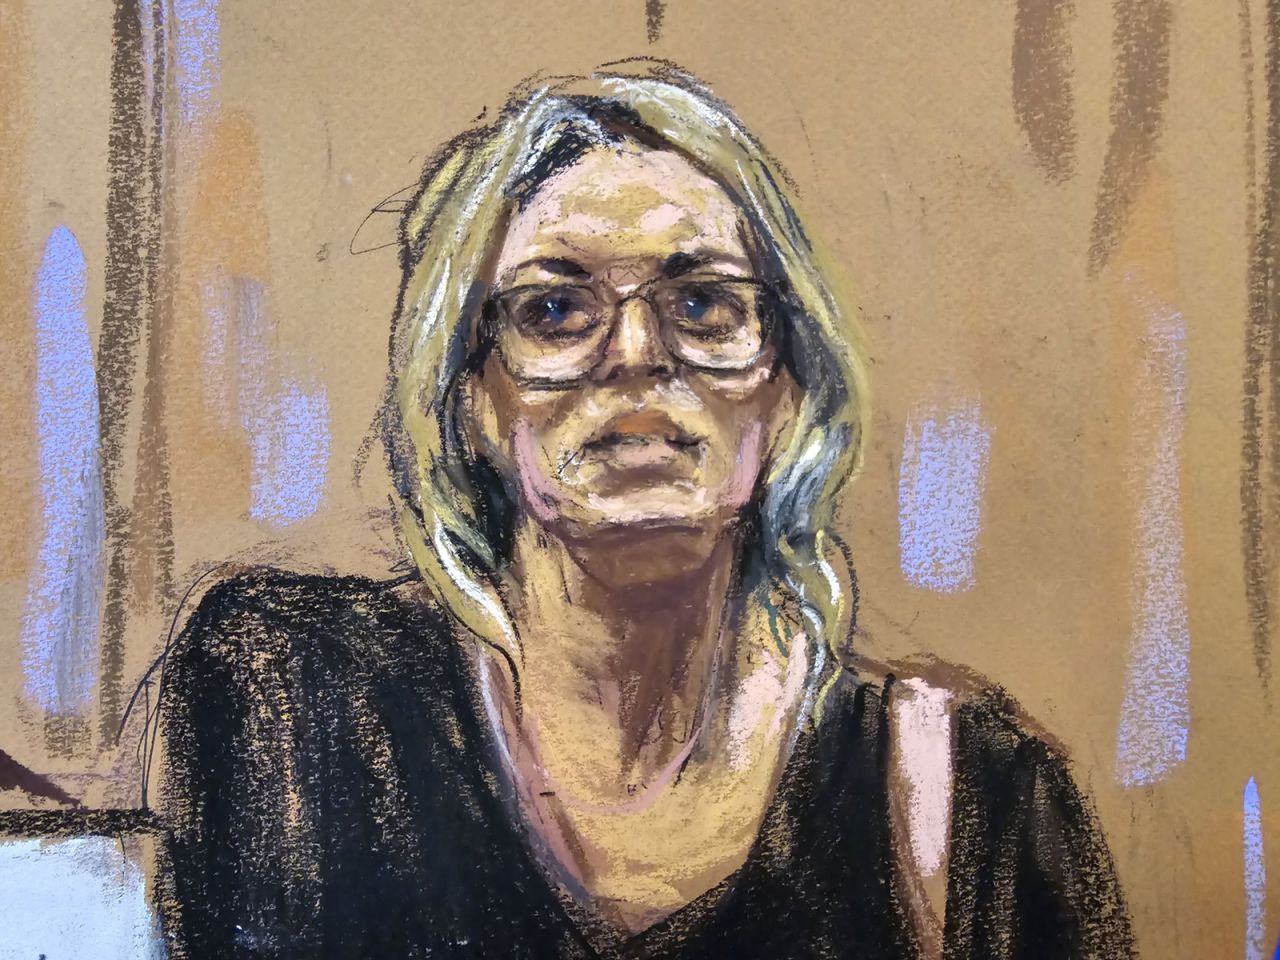 Stormy Daniels appears in court on Tuesday, May 7.